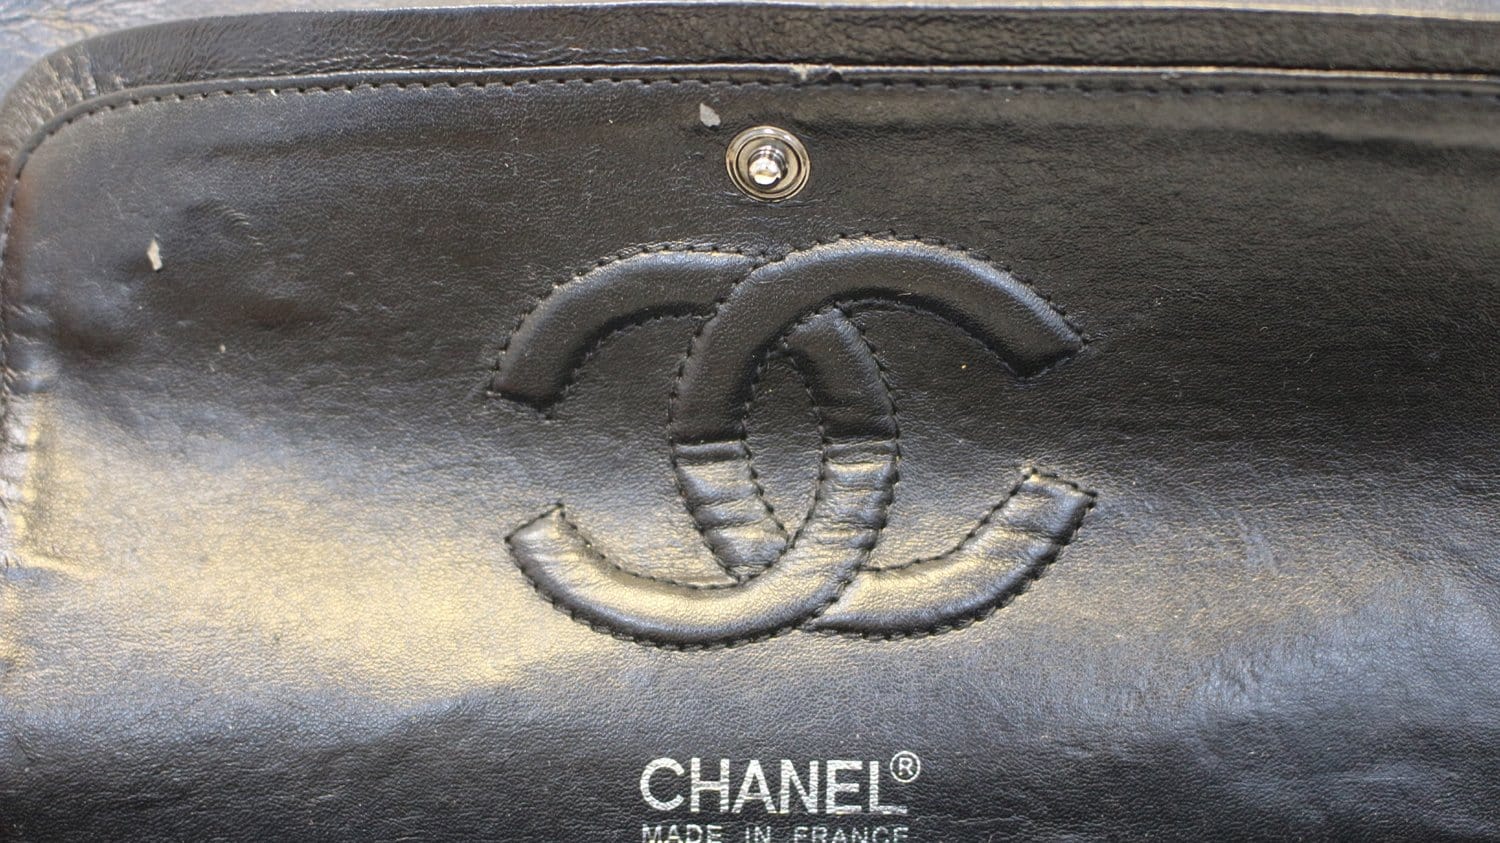 2.55 leather crossbody bag Chanel Black in Leather - 35756375